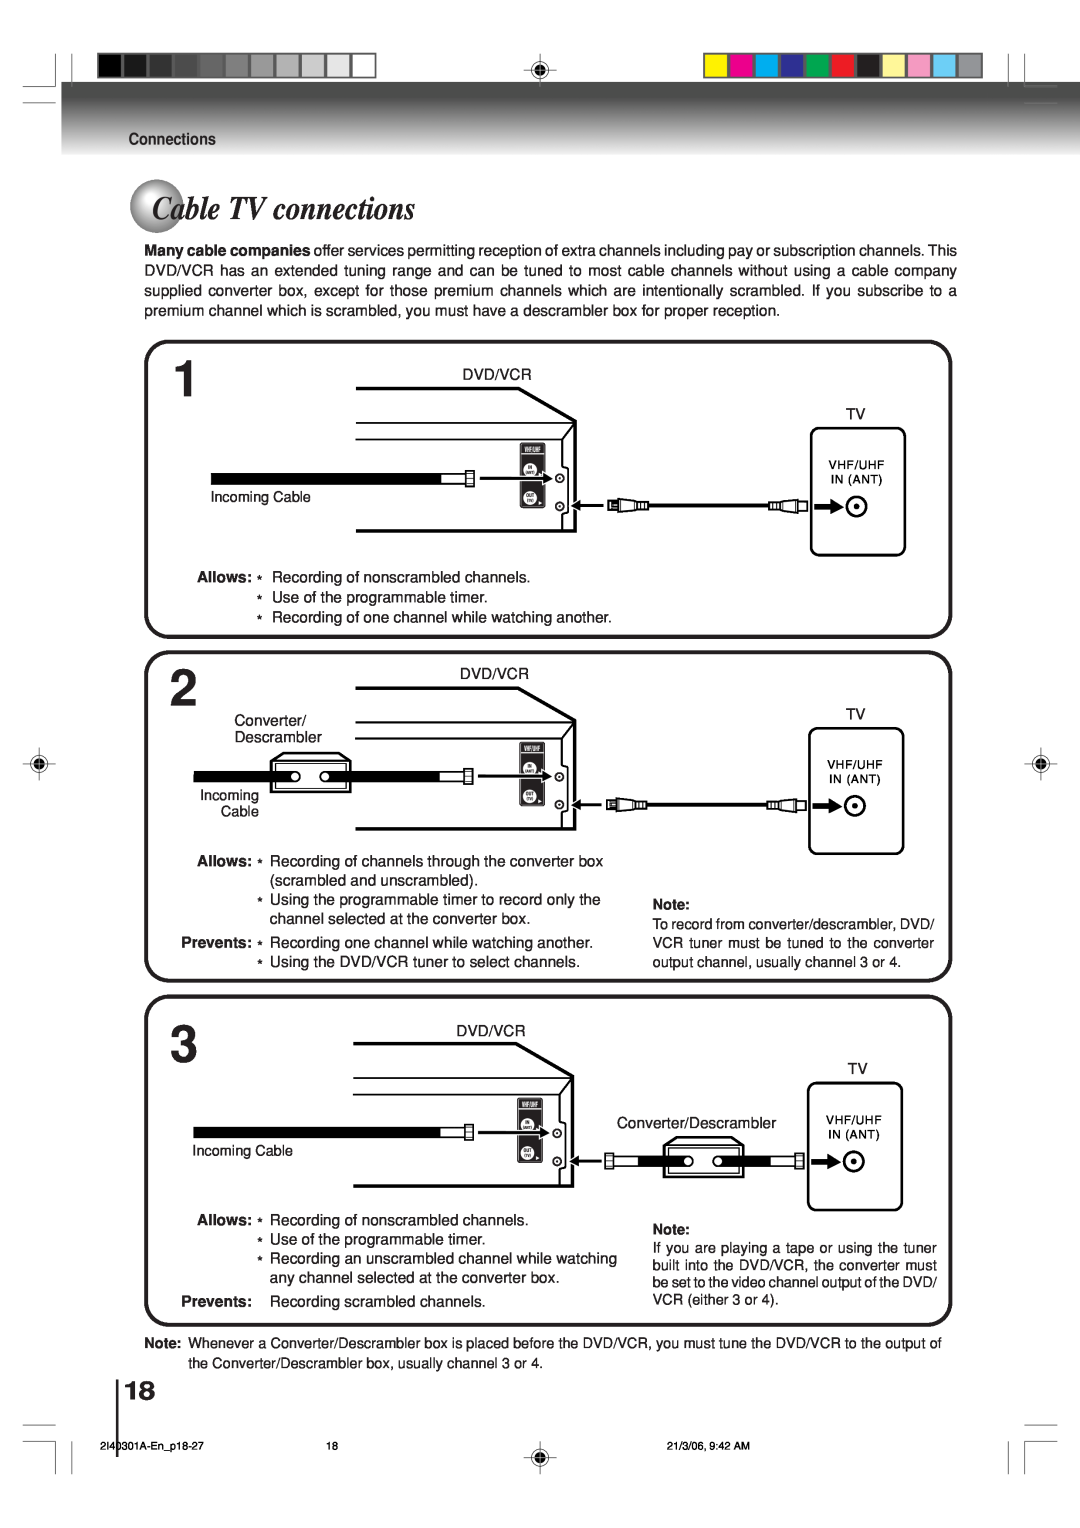 Toshiba SD-V594SC owner manual Cable TV connections 